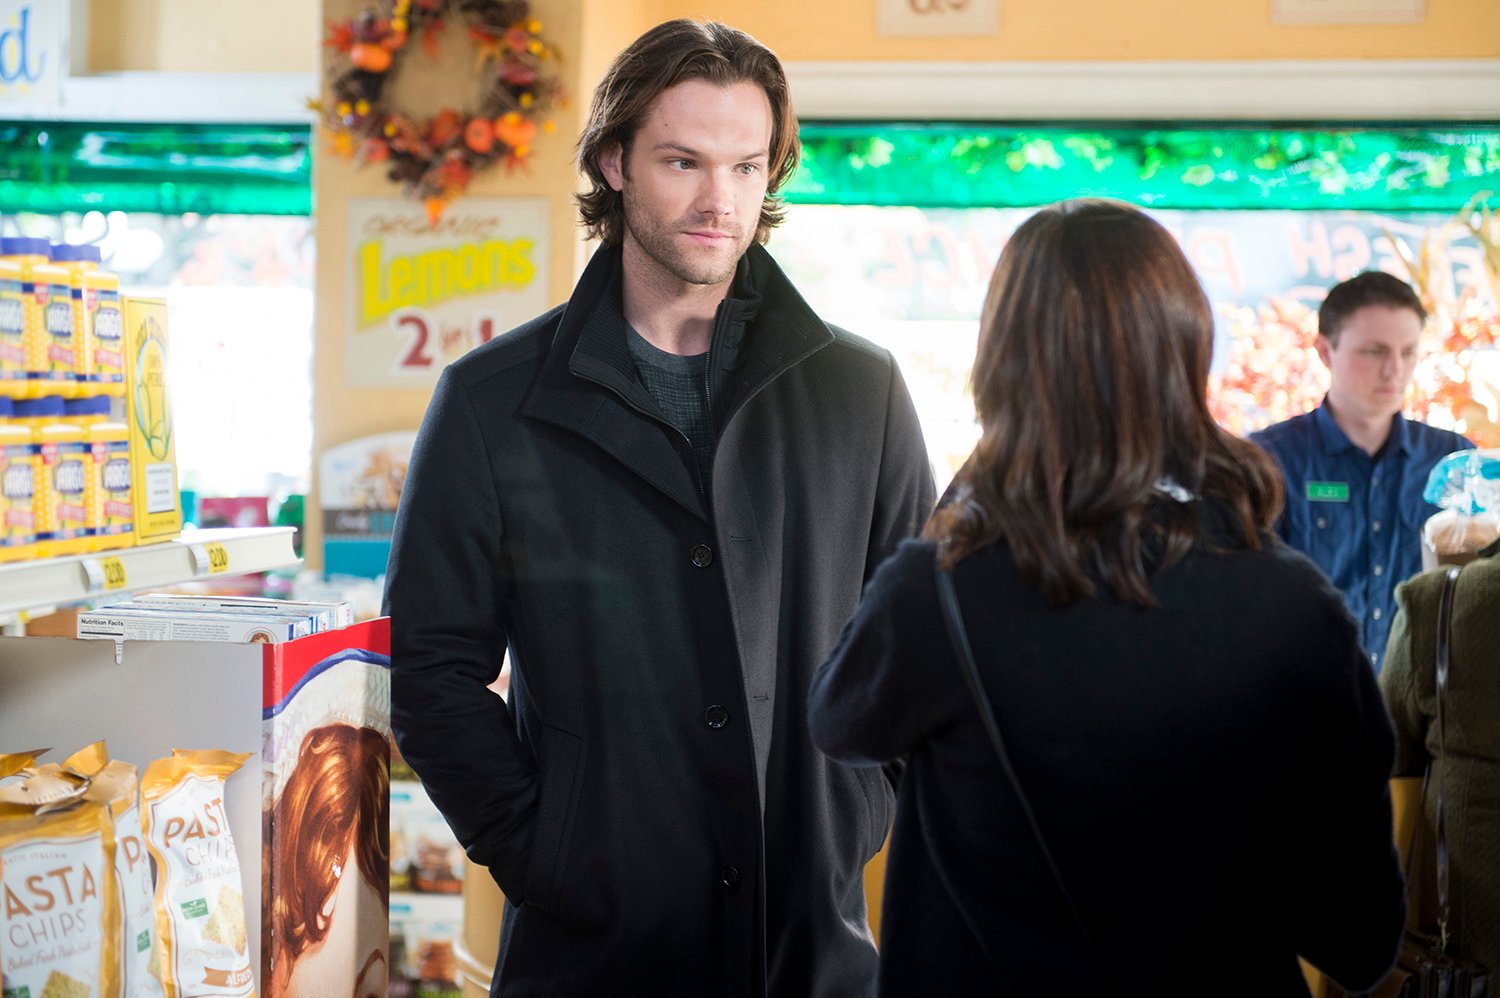 'Gilmore Girls: A Year in the Life' guest star Jared Padalecki as Dean Forrester